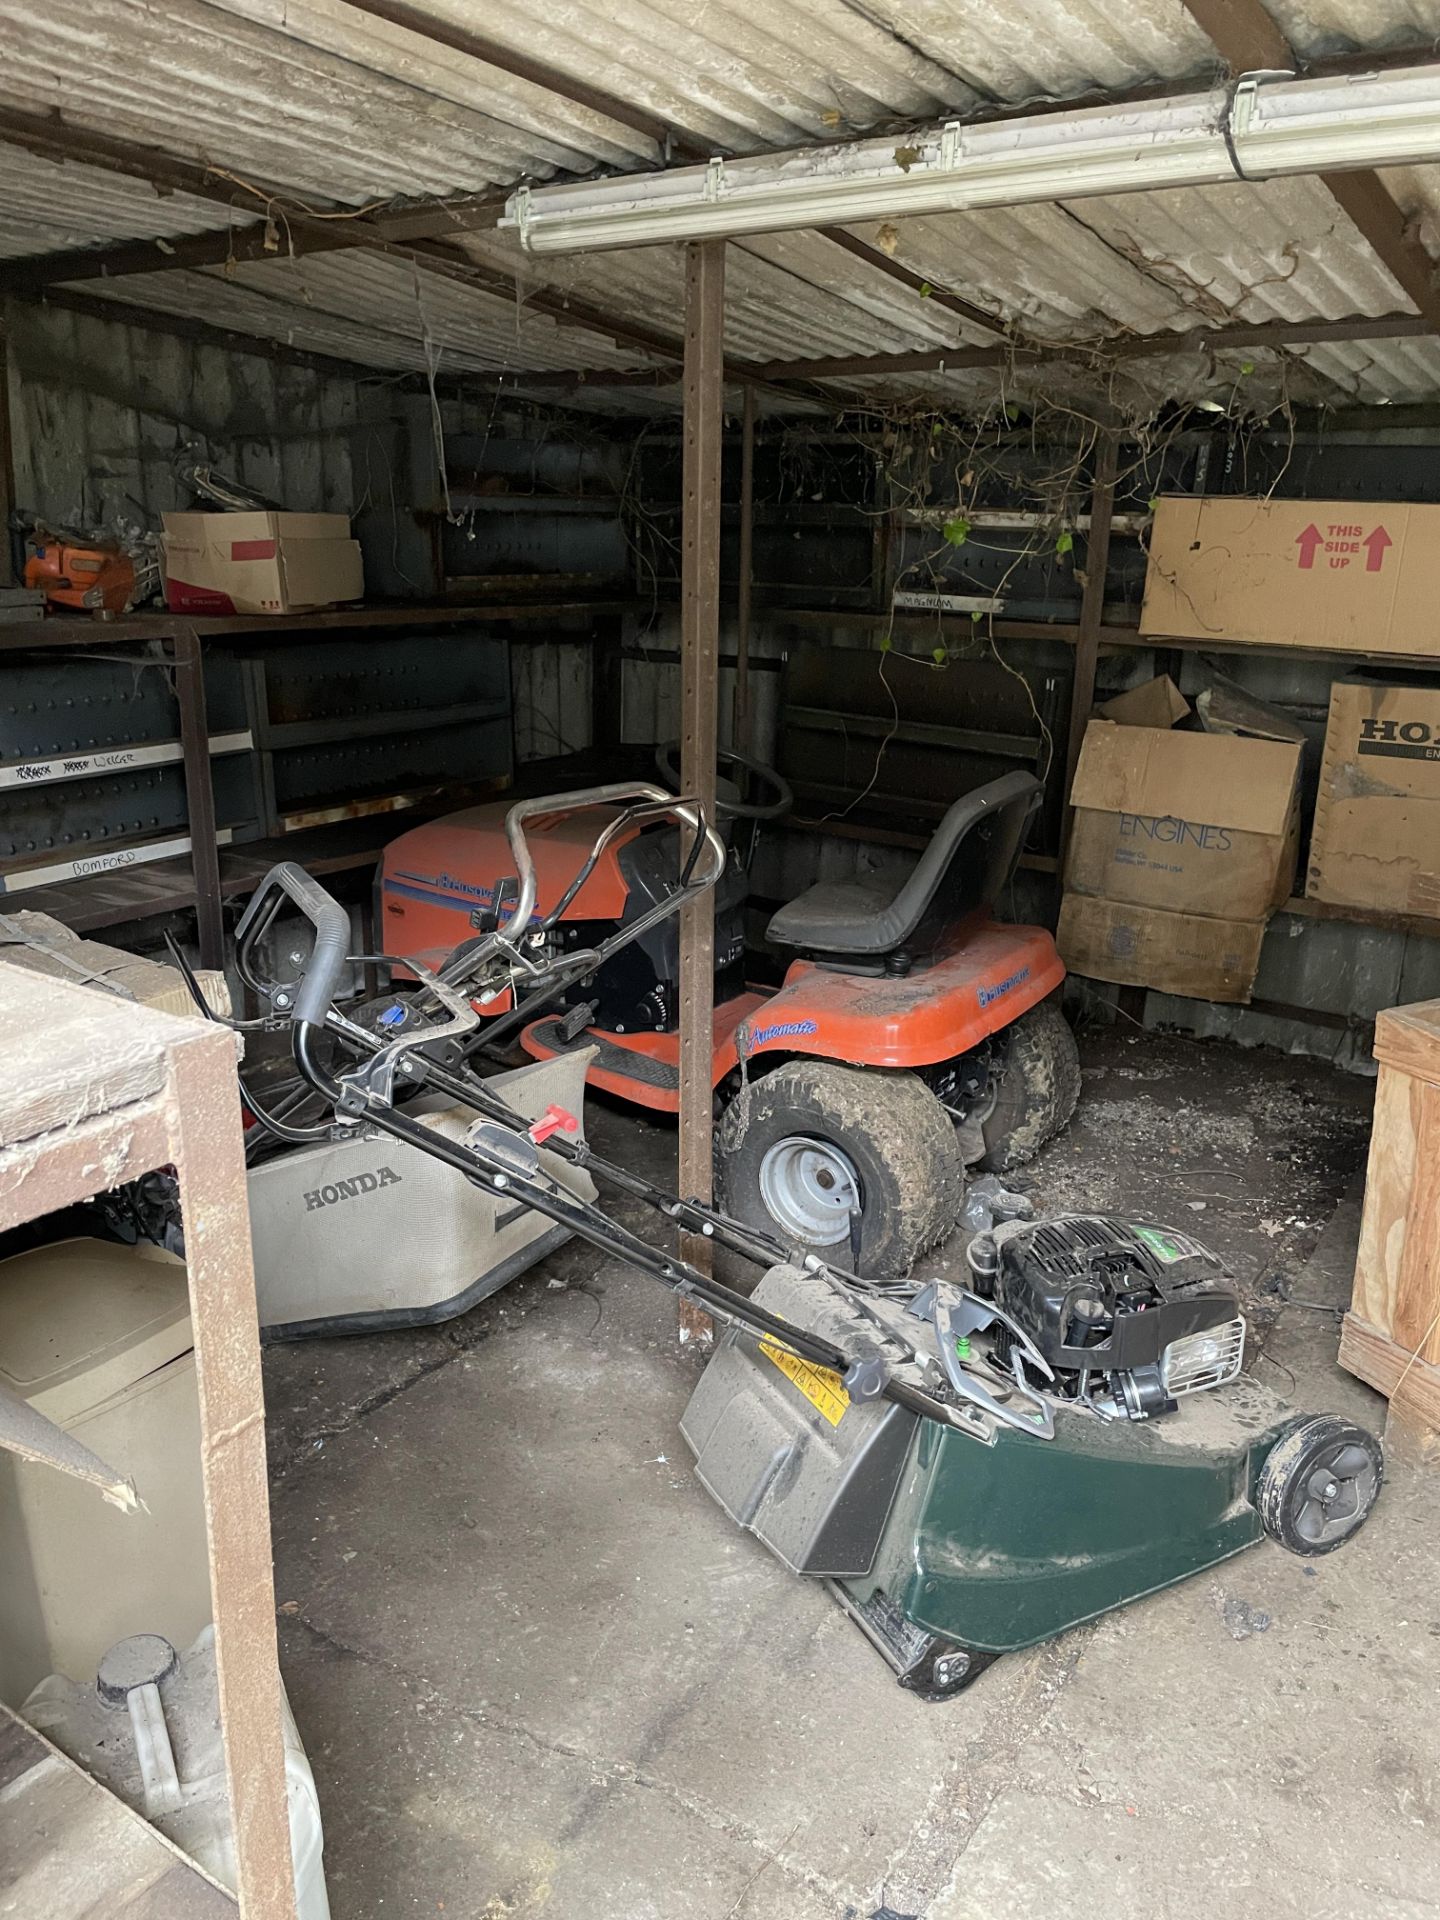 Contents of Lean To, including a Quantity of Redundant Garden Machinery: 2: Ride on Mowers, 3: Self